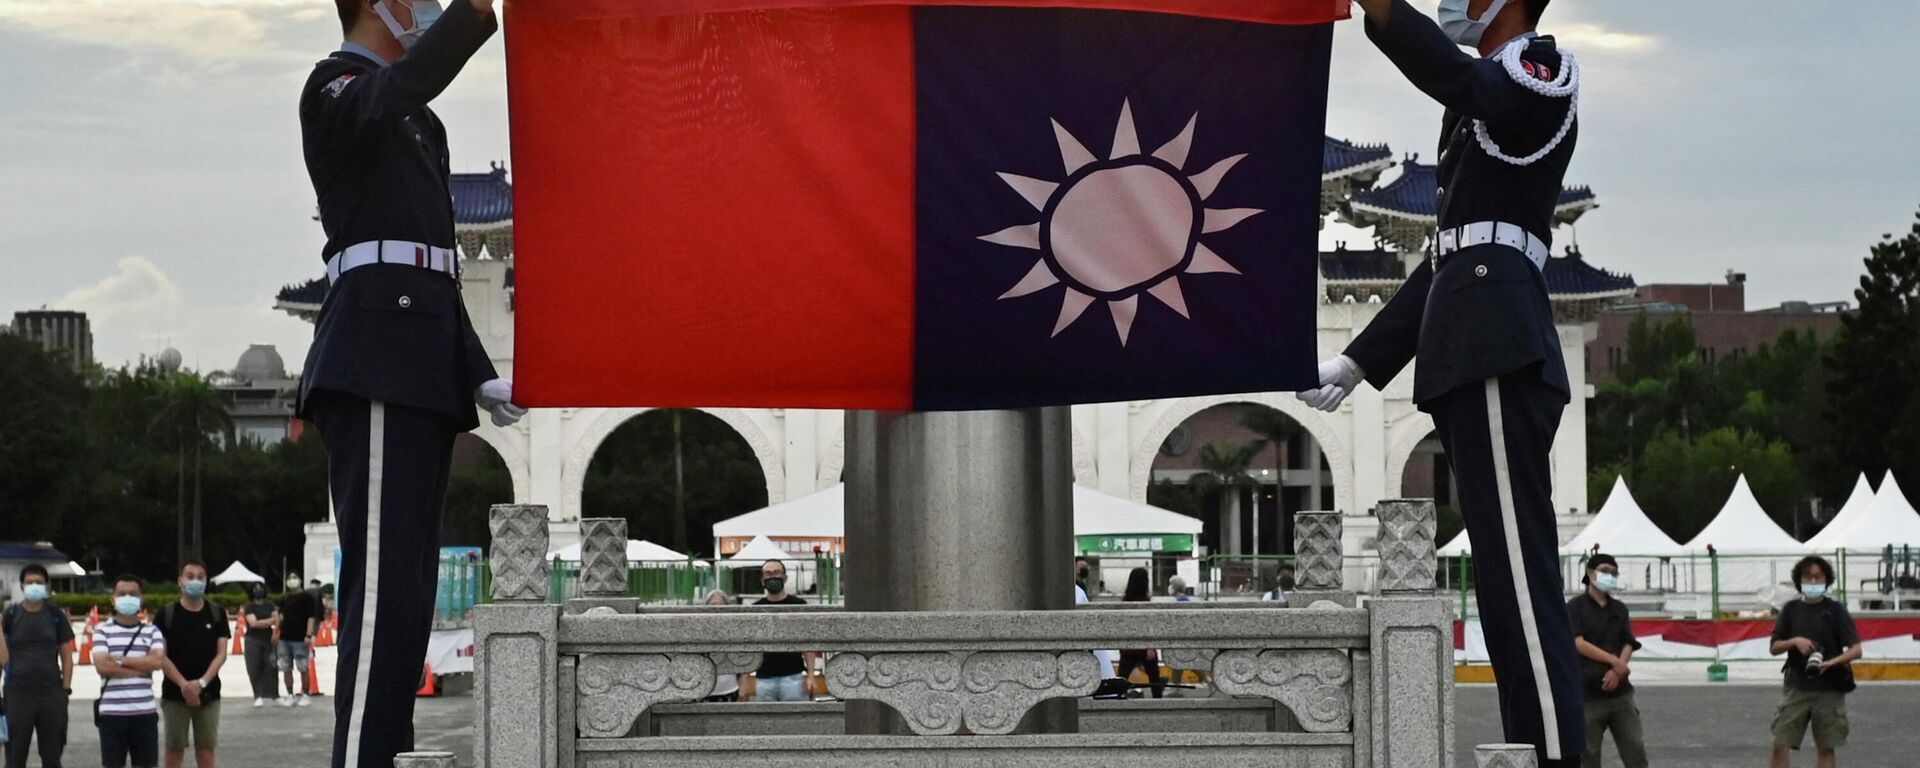 Honour guards fold the Taiwan flag during a flag lowering ceremony at the Chiang Kai-shek Memorial Hall in Taipei on June 4, 2022 - Sputnik International, 1920, 03.08.2022